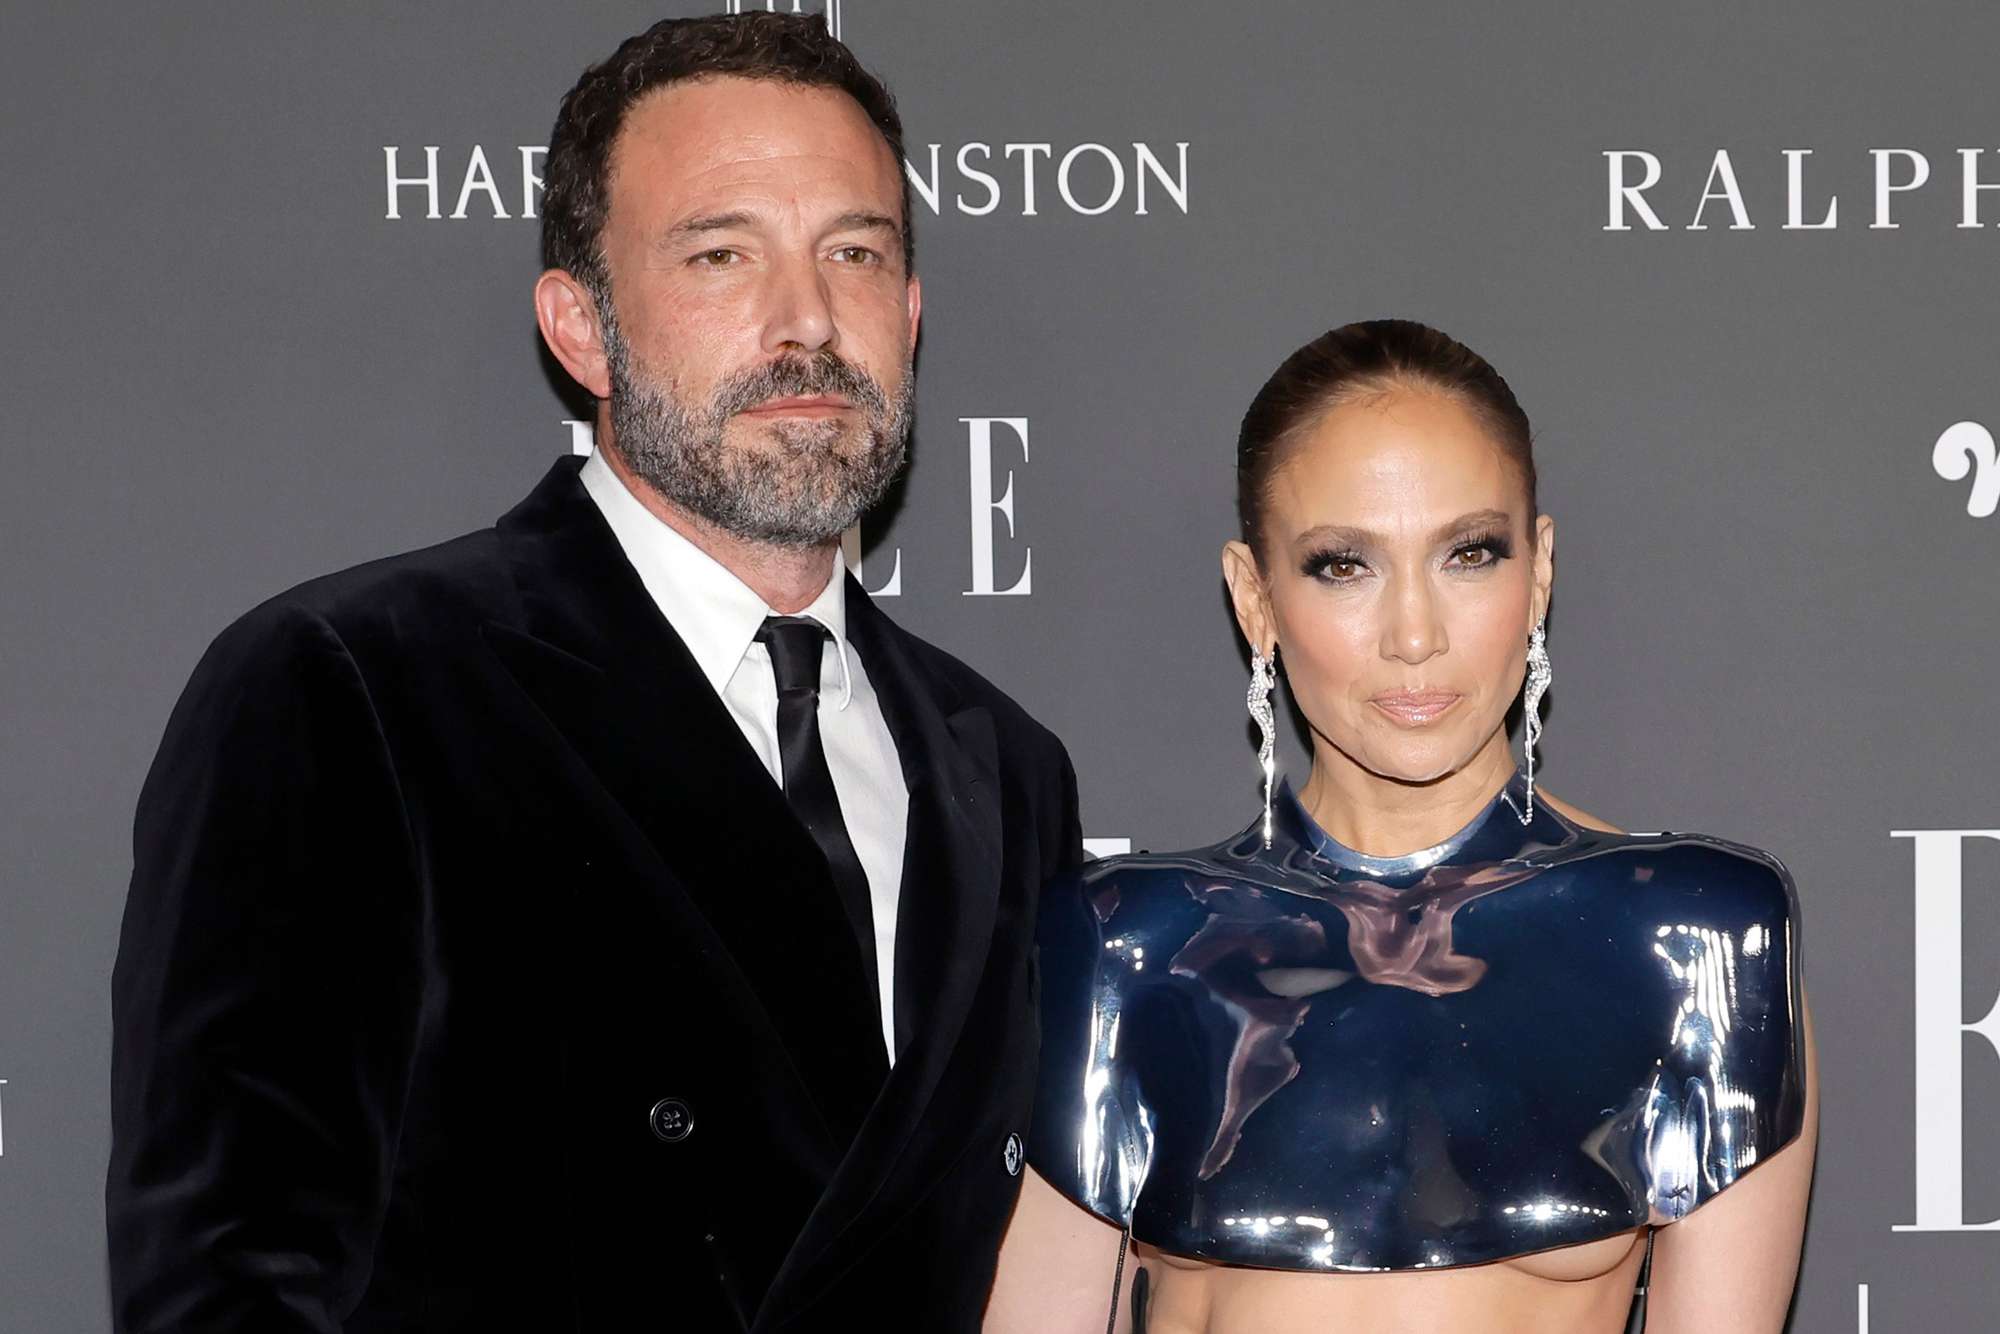 Ben Affleck Spoke About 'Trying to Learn to Compromise' with Jennifer Lopez Before Rumors of Marriage Issues